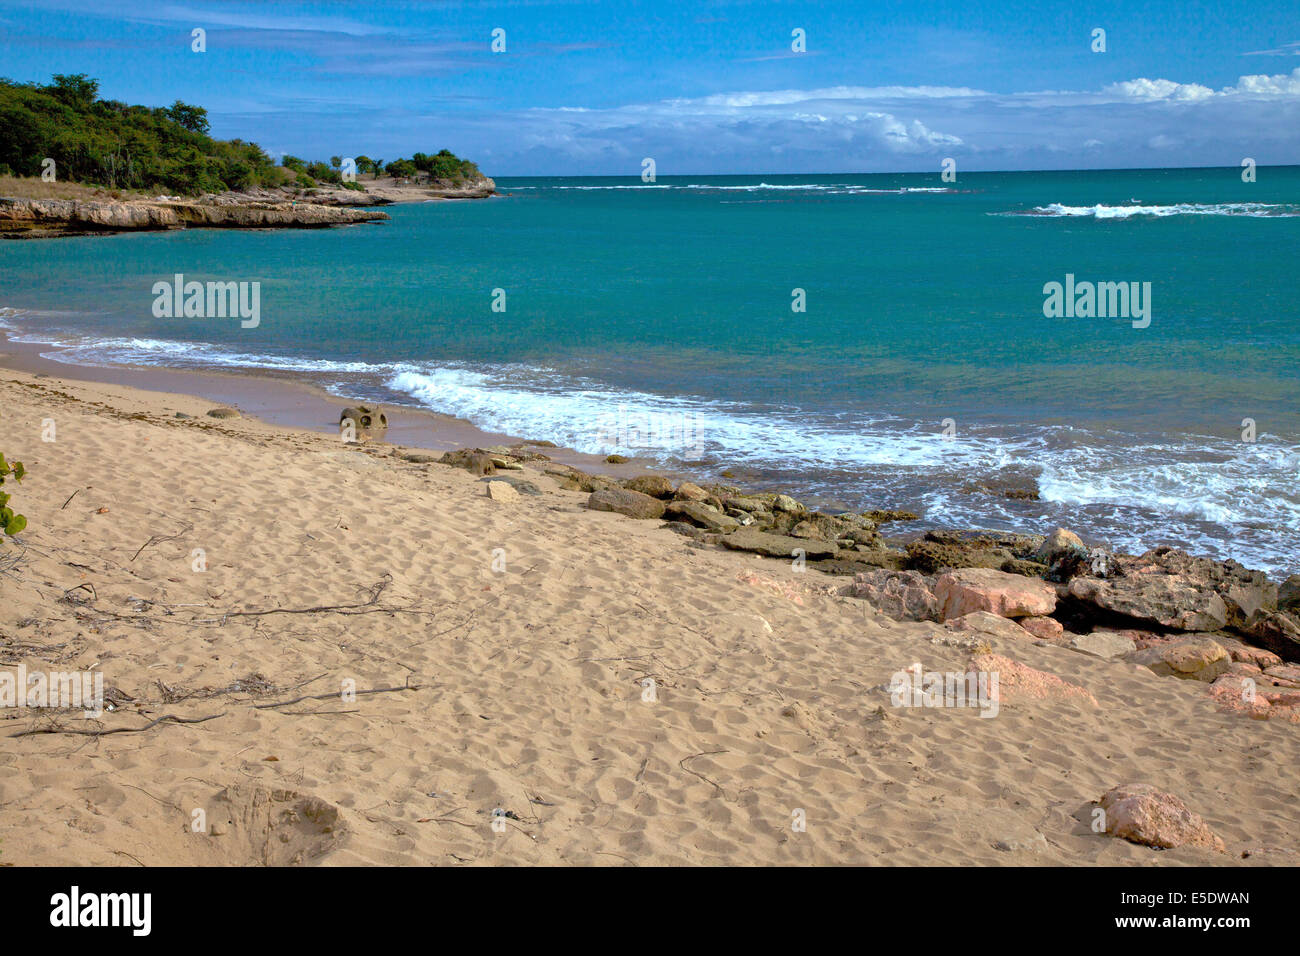 Empty beach of Whale Bay in the Bosque Estatal de Guanica forest reserve in Puerto Rico considered the best example of dry forest in the Caribbean. Stock Photo